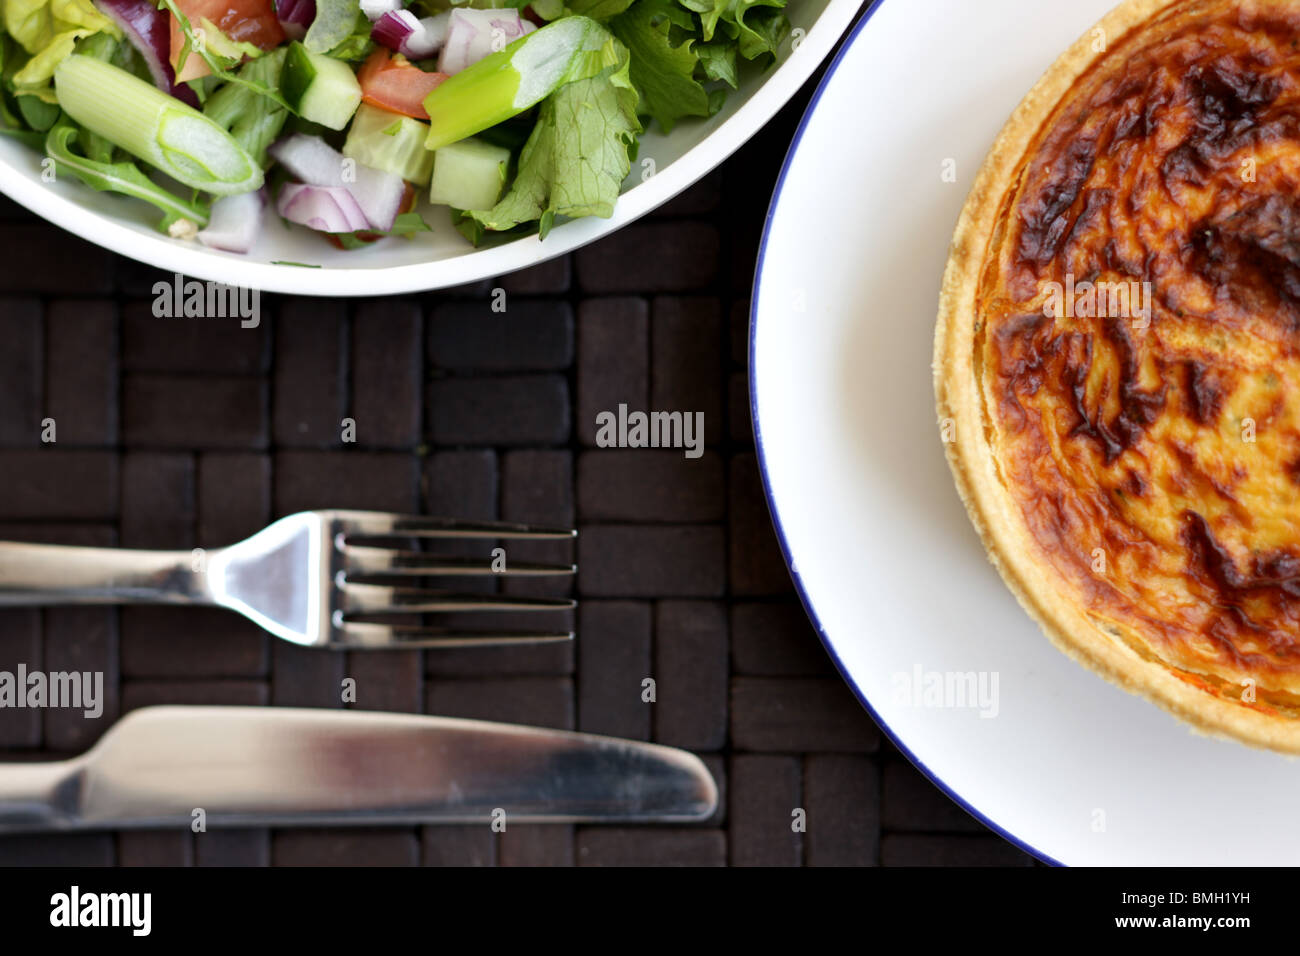 Fresh Healthy Vegetarian Style Cheese and Onion Quiche Tart With A Mixed Garden Summer Salad And No People Stock Photo